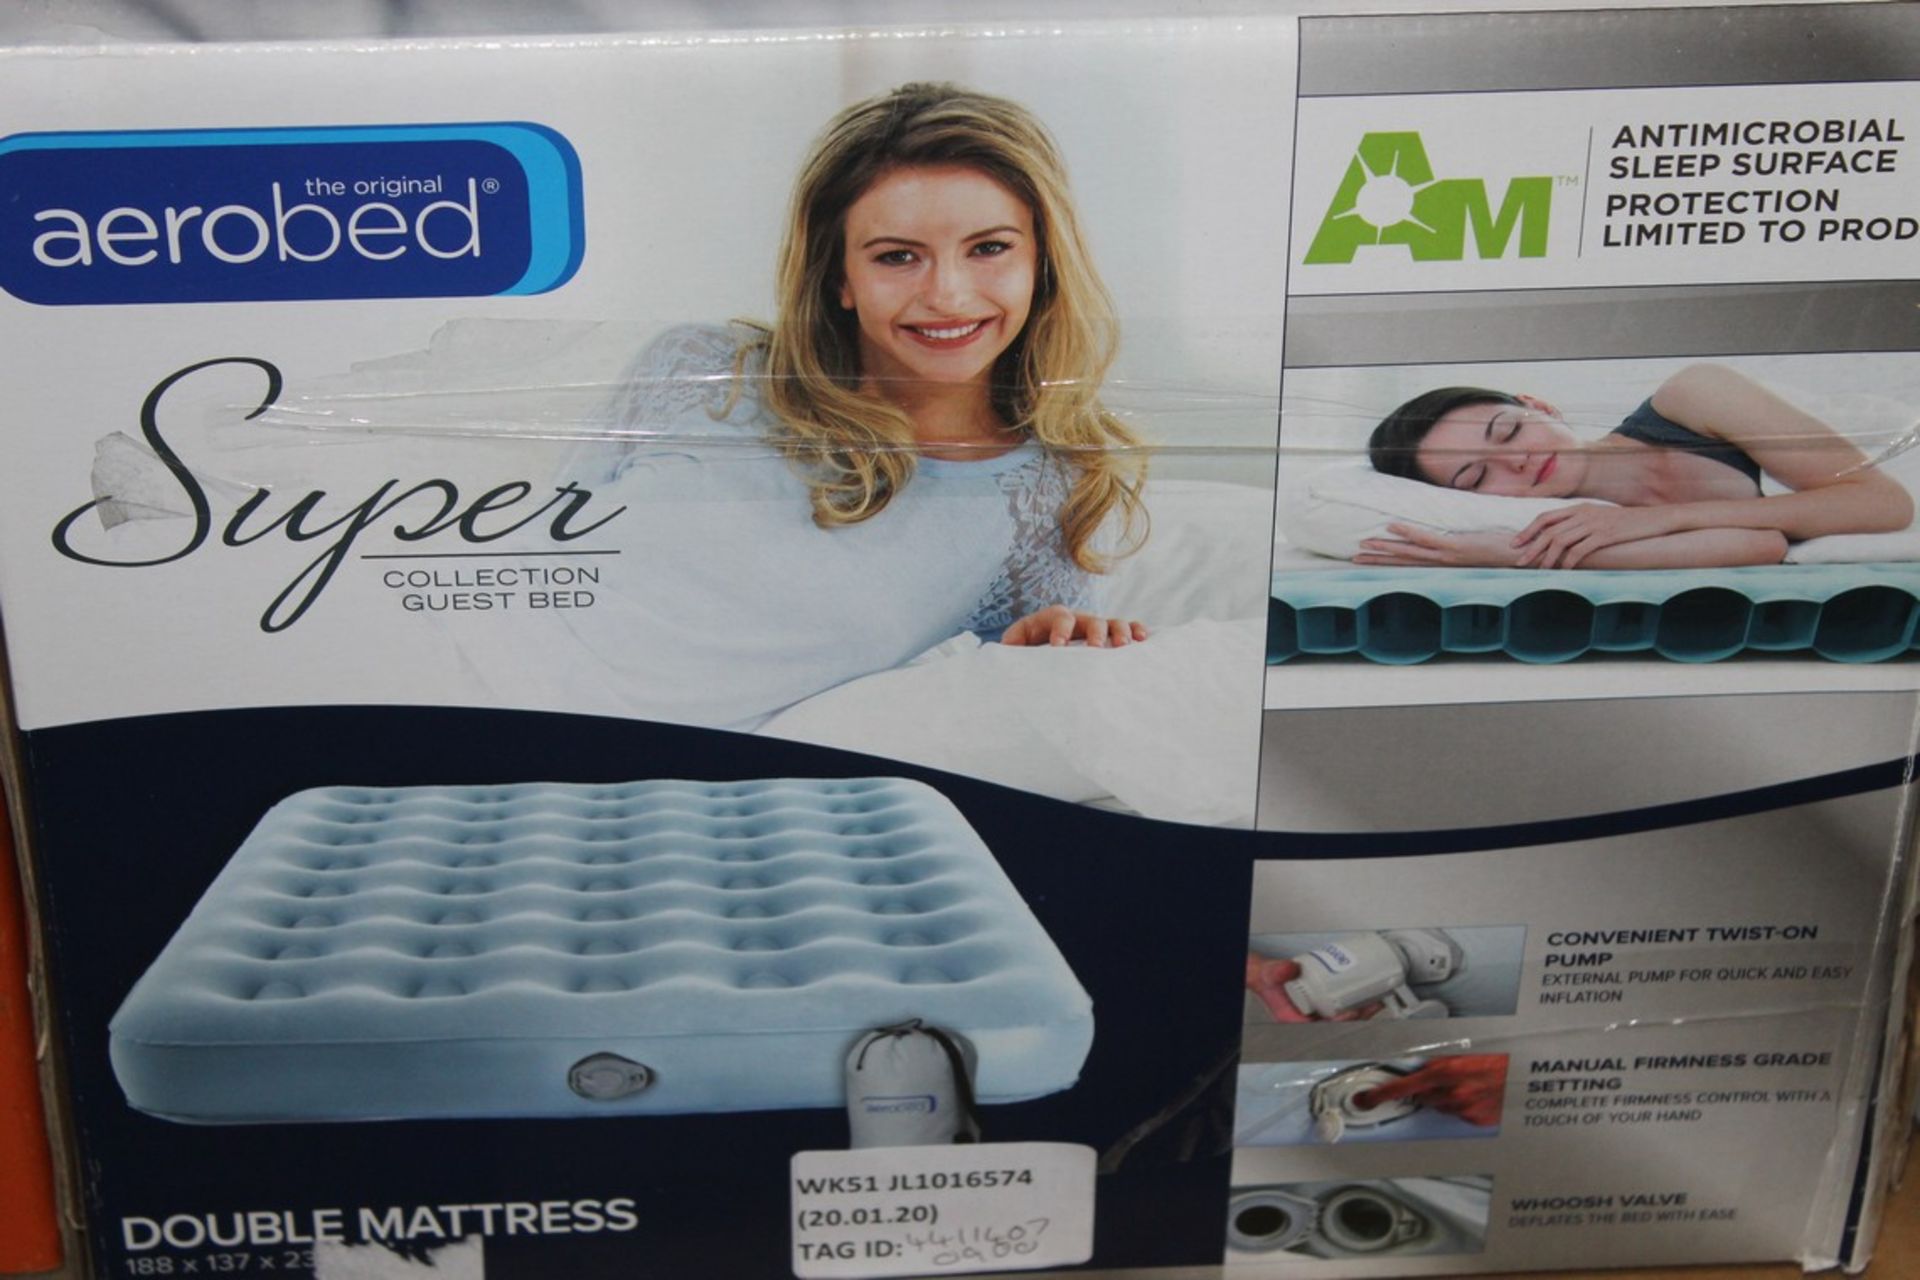 Boxed Airo Bed, Super Collection, Guest Bed, Inflatable Mattress, RRP£90.00 (4411407) (Public